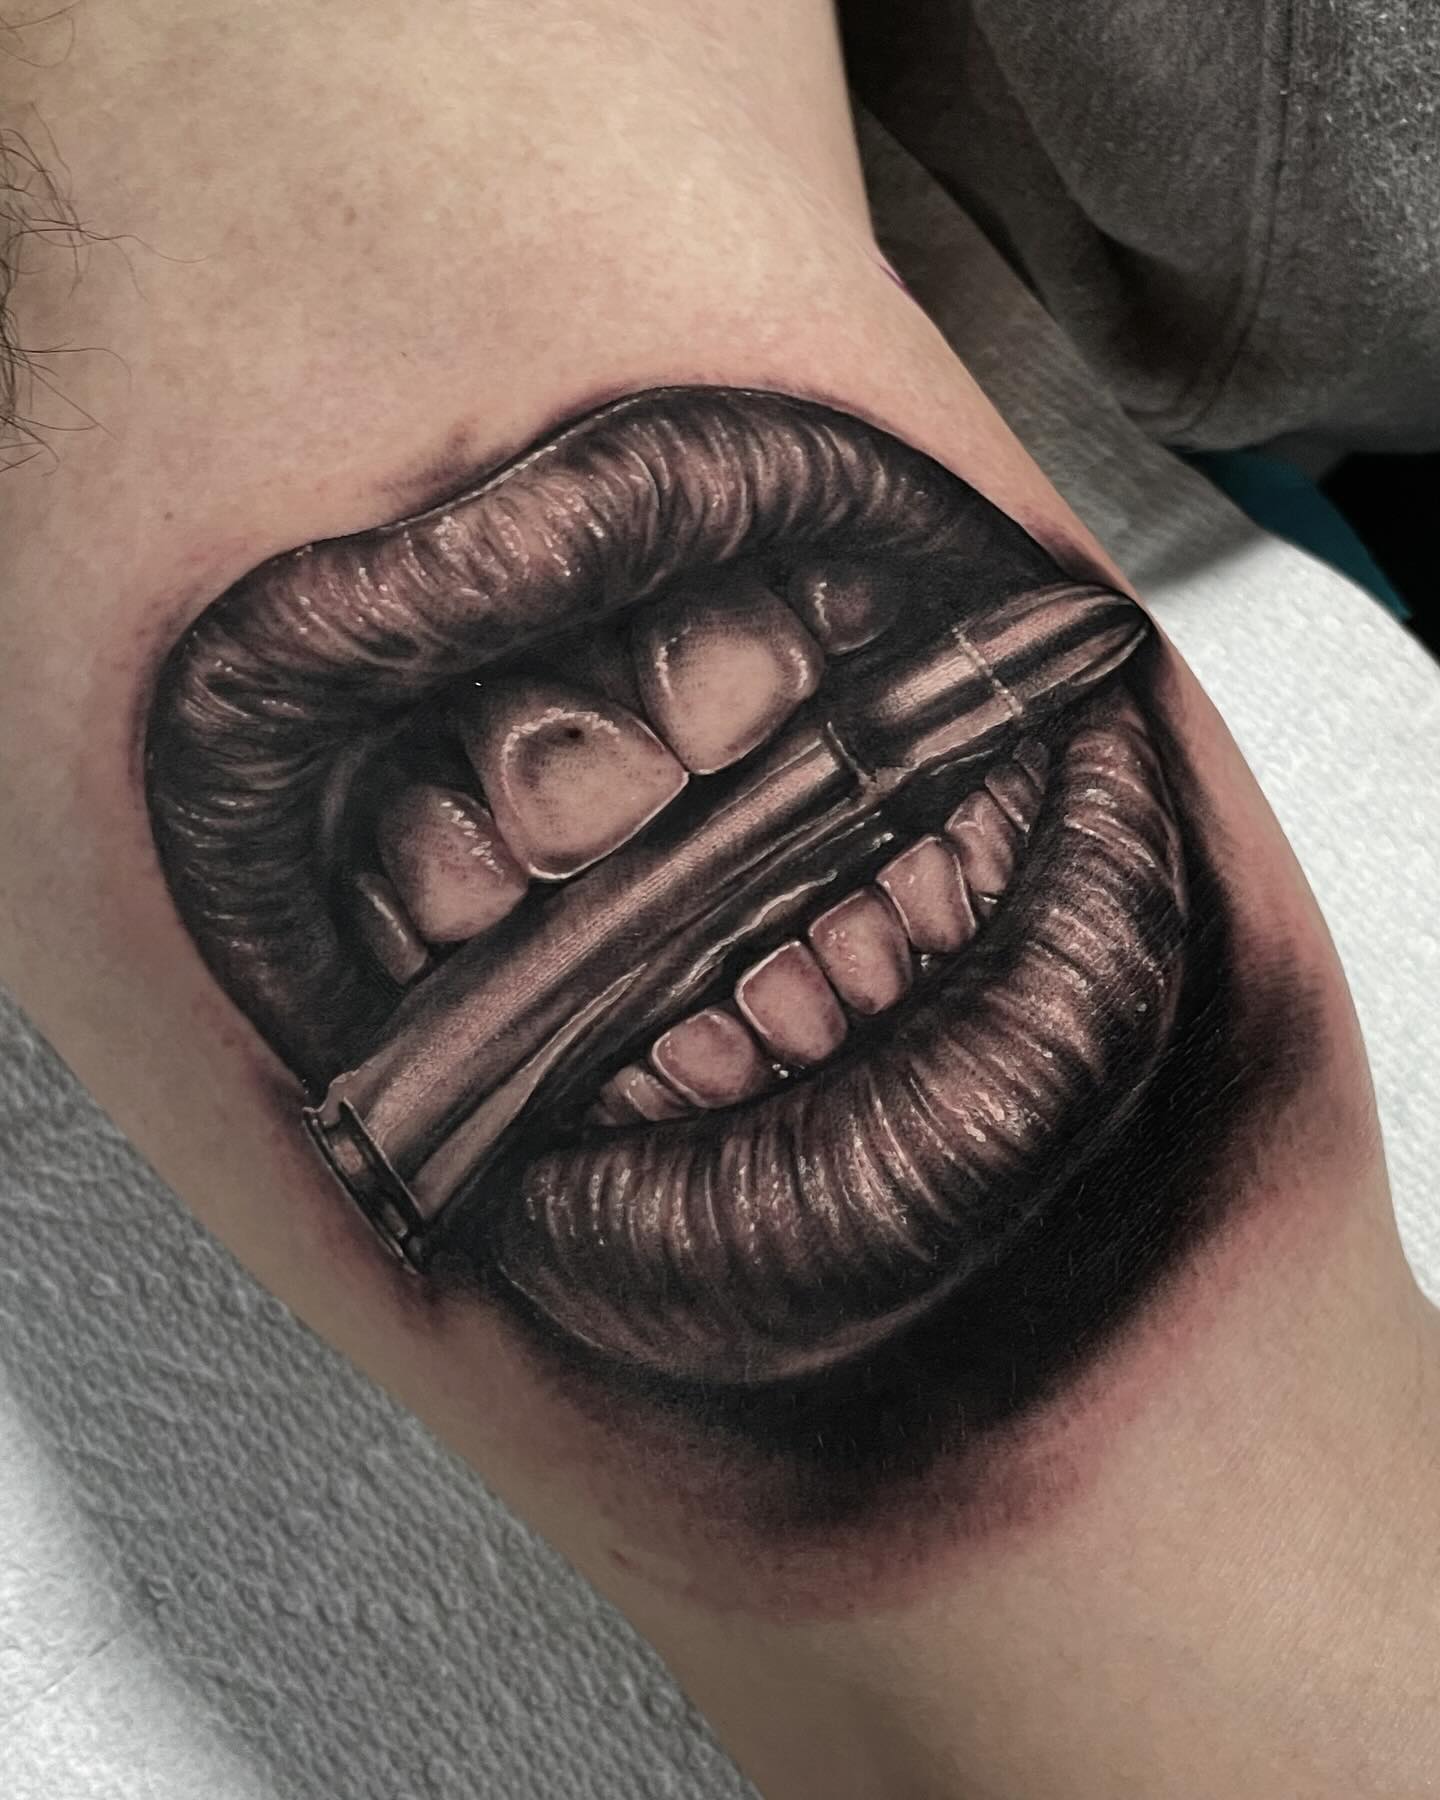 Forgot to post this one done at the @manitobatattooexpo 
Done in 4h 
#lipstattoo #manitoba #manitobatattoo #winnipeg #winnipegtattoos #winnipegtattooartist #manitobatattooexpo